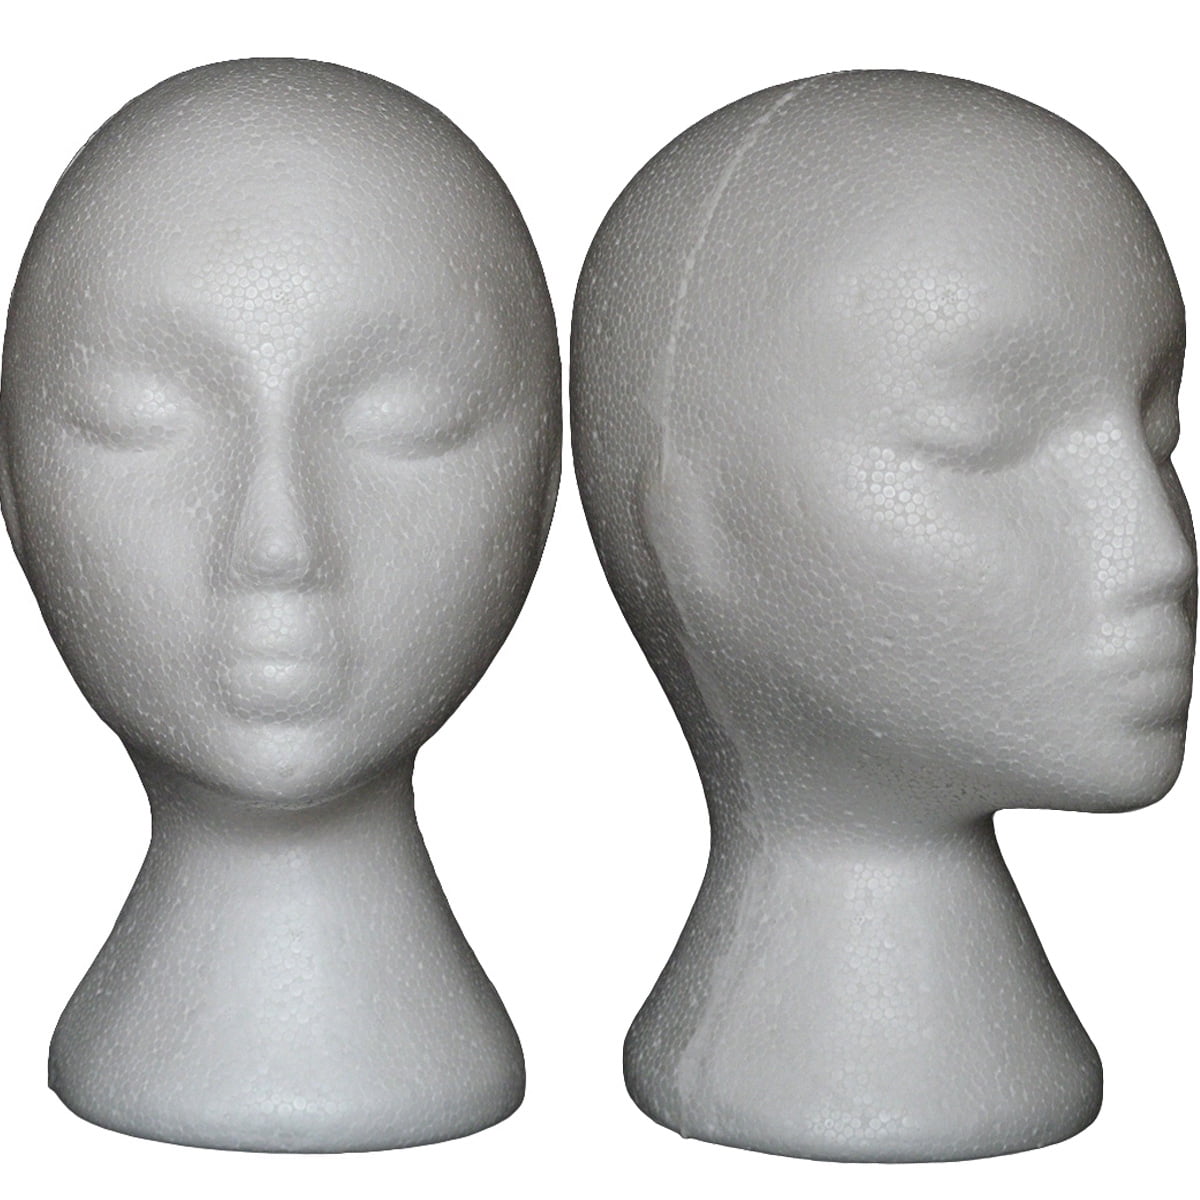 Travelwant 2Pcs/Set Styrofoam Wig Head - Tall Female Foam Mannequin Wig  Stand and Holder for Style, Model And Display Hair, Hats and Hairpieces,  Mask 